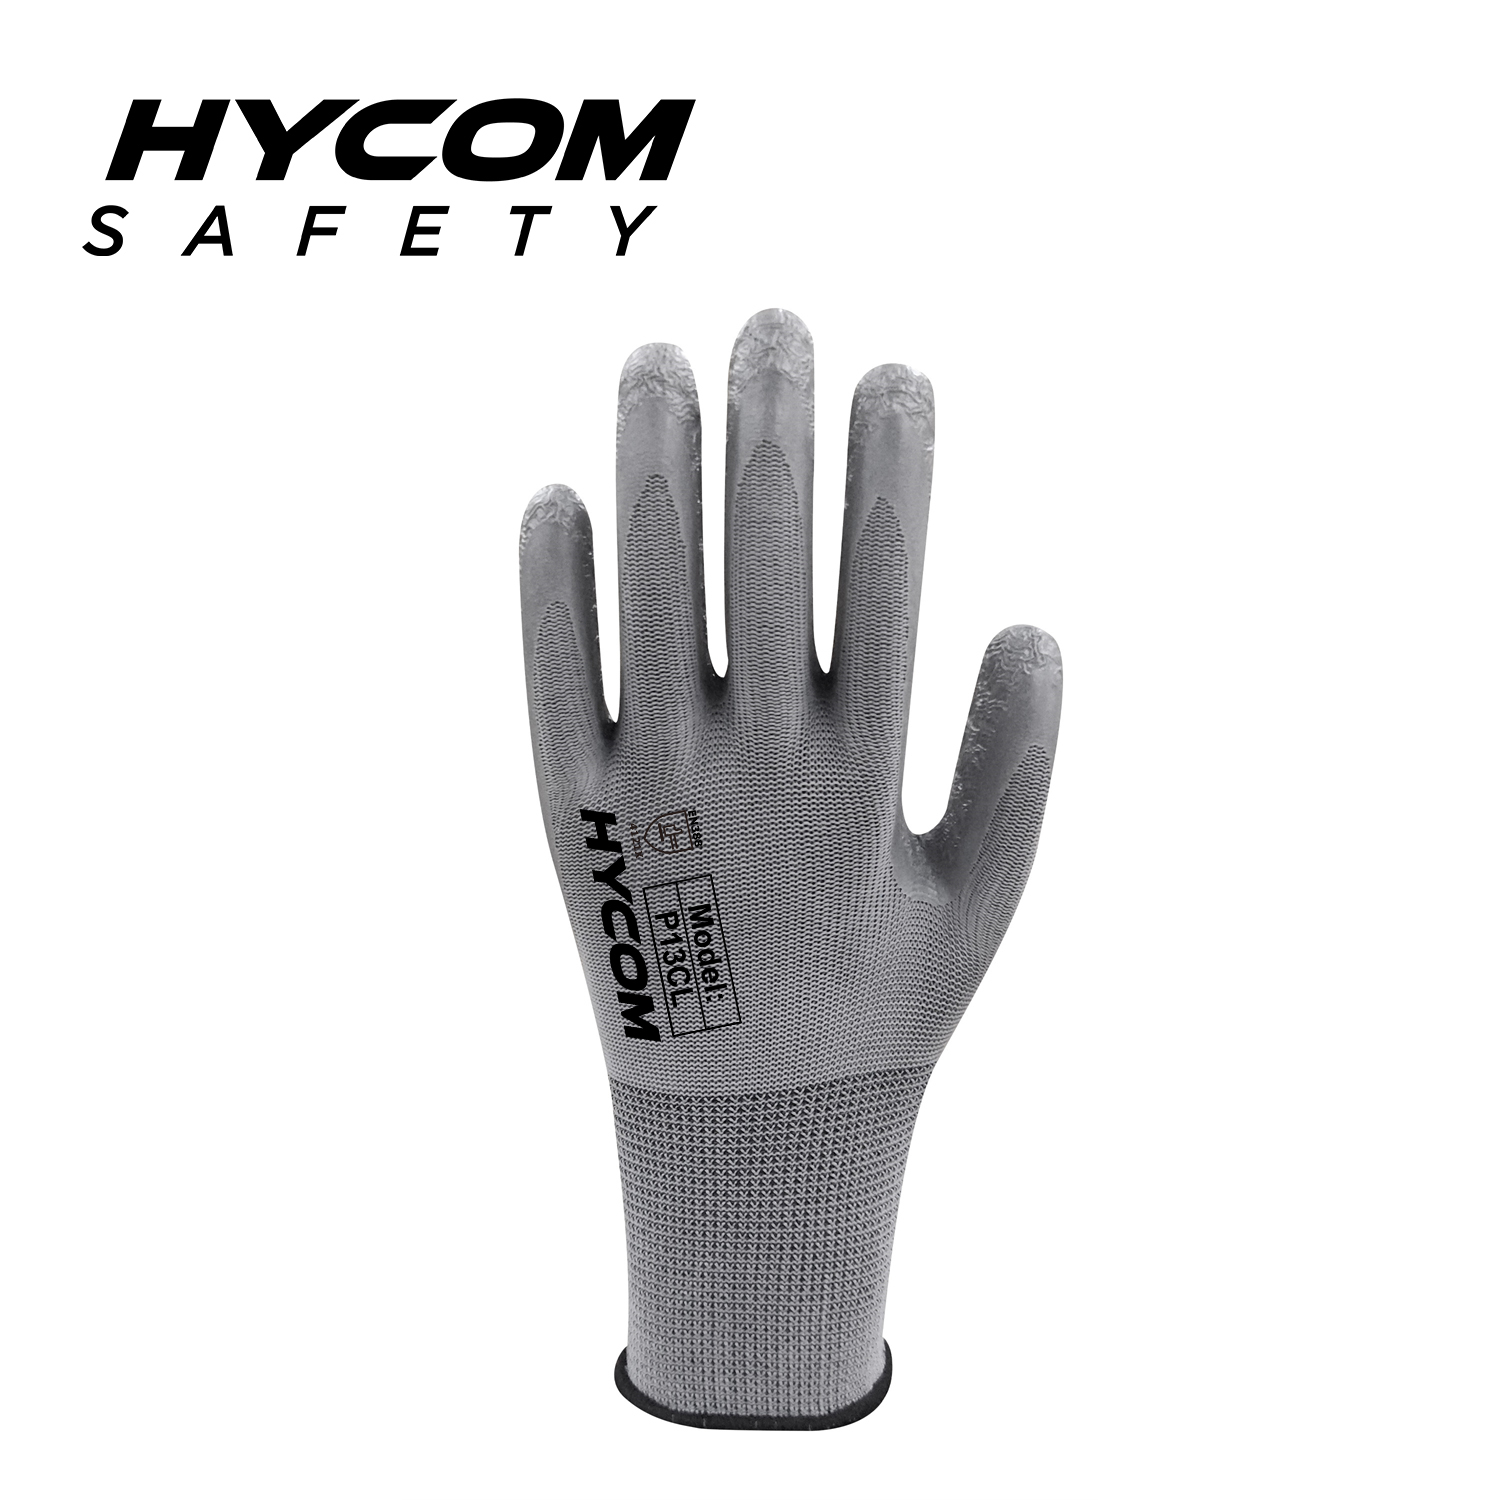 HYCOM 13G Polyester Work Glove with Palm Crinkle Latex Coating Super Grip 